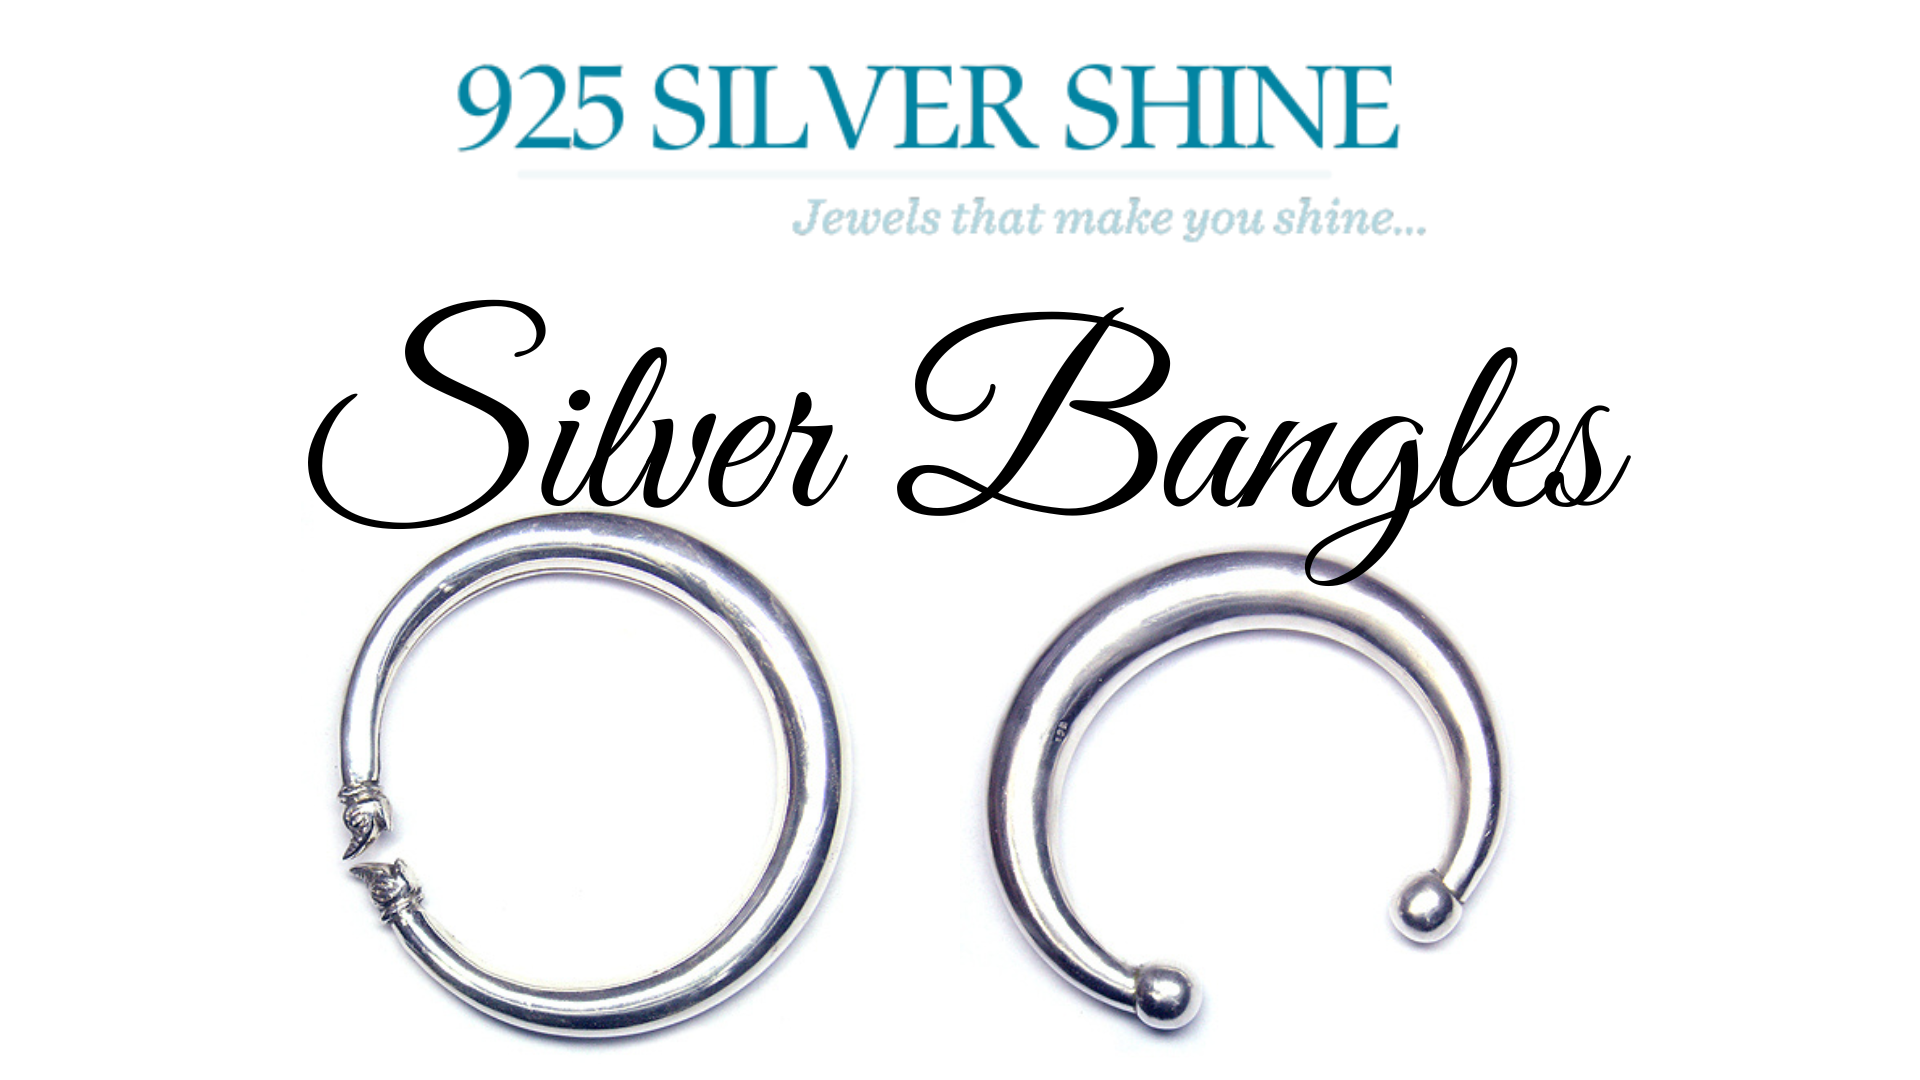 Sterling silver bangles, 925 silver shine, gold plated bangles